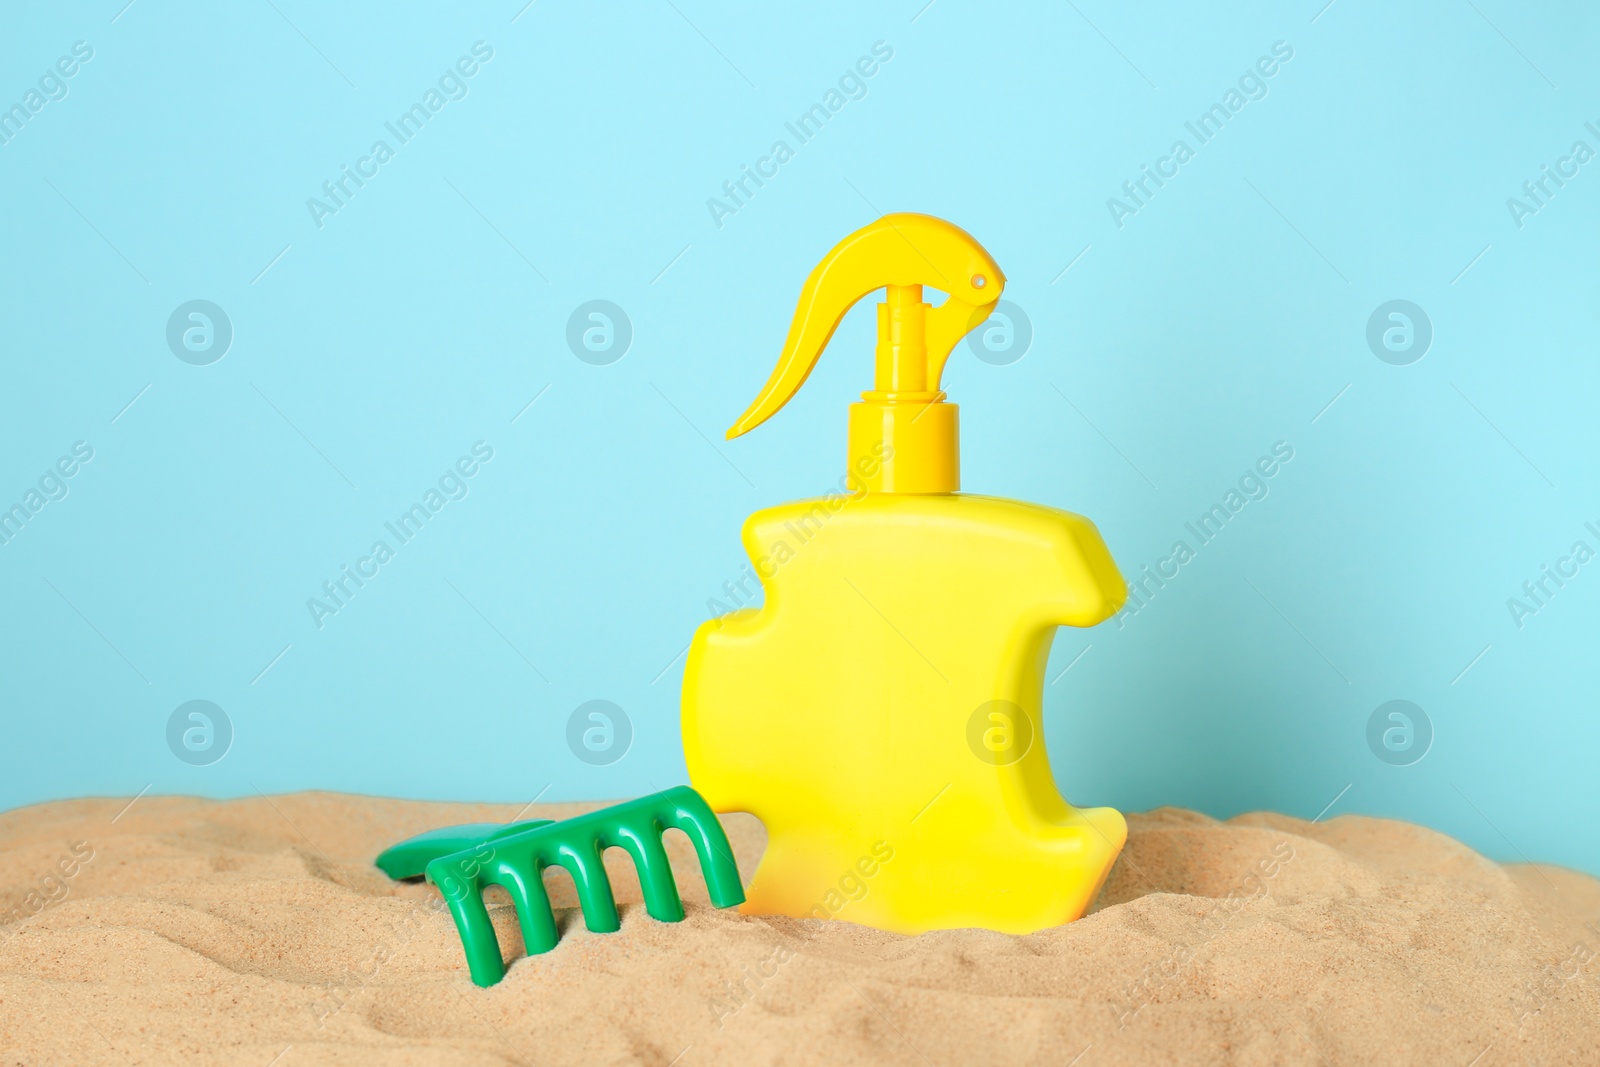 Photo of Suntan product and plastic beach toy on sand against light blue background